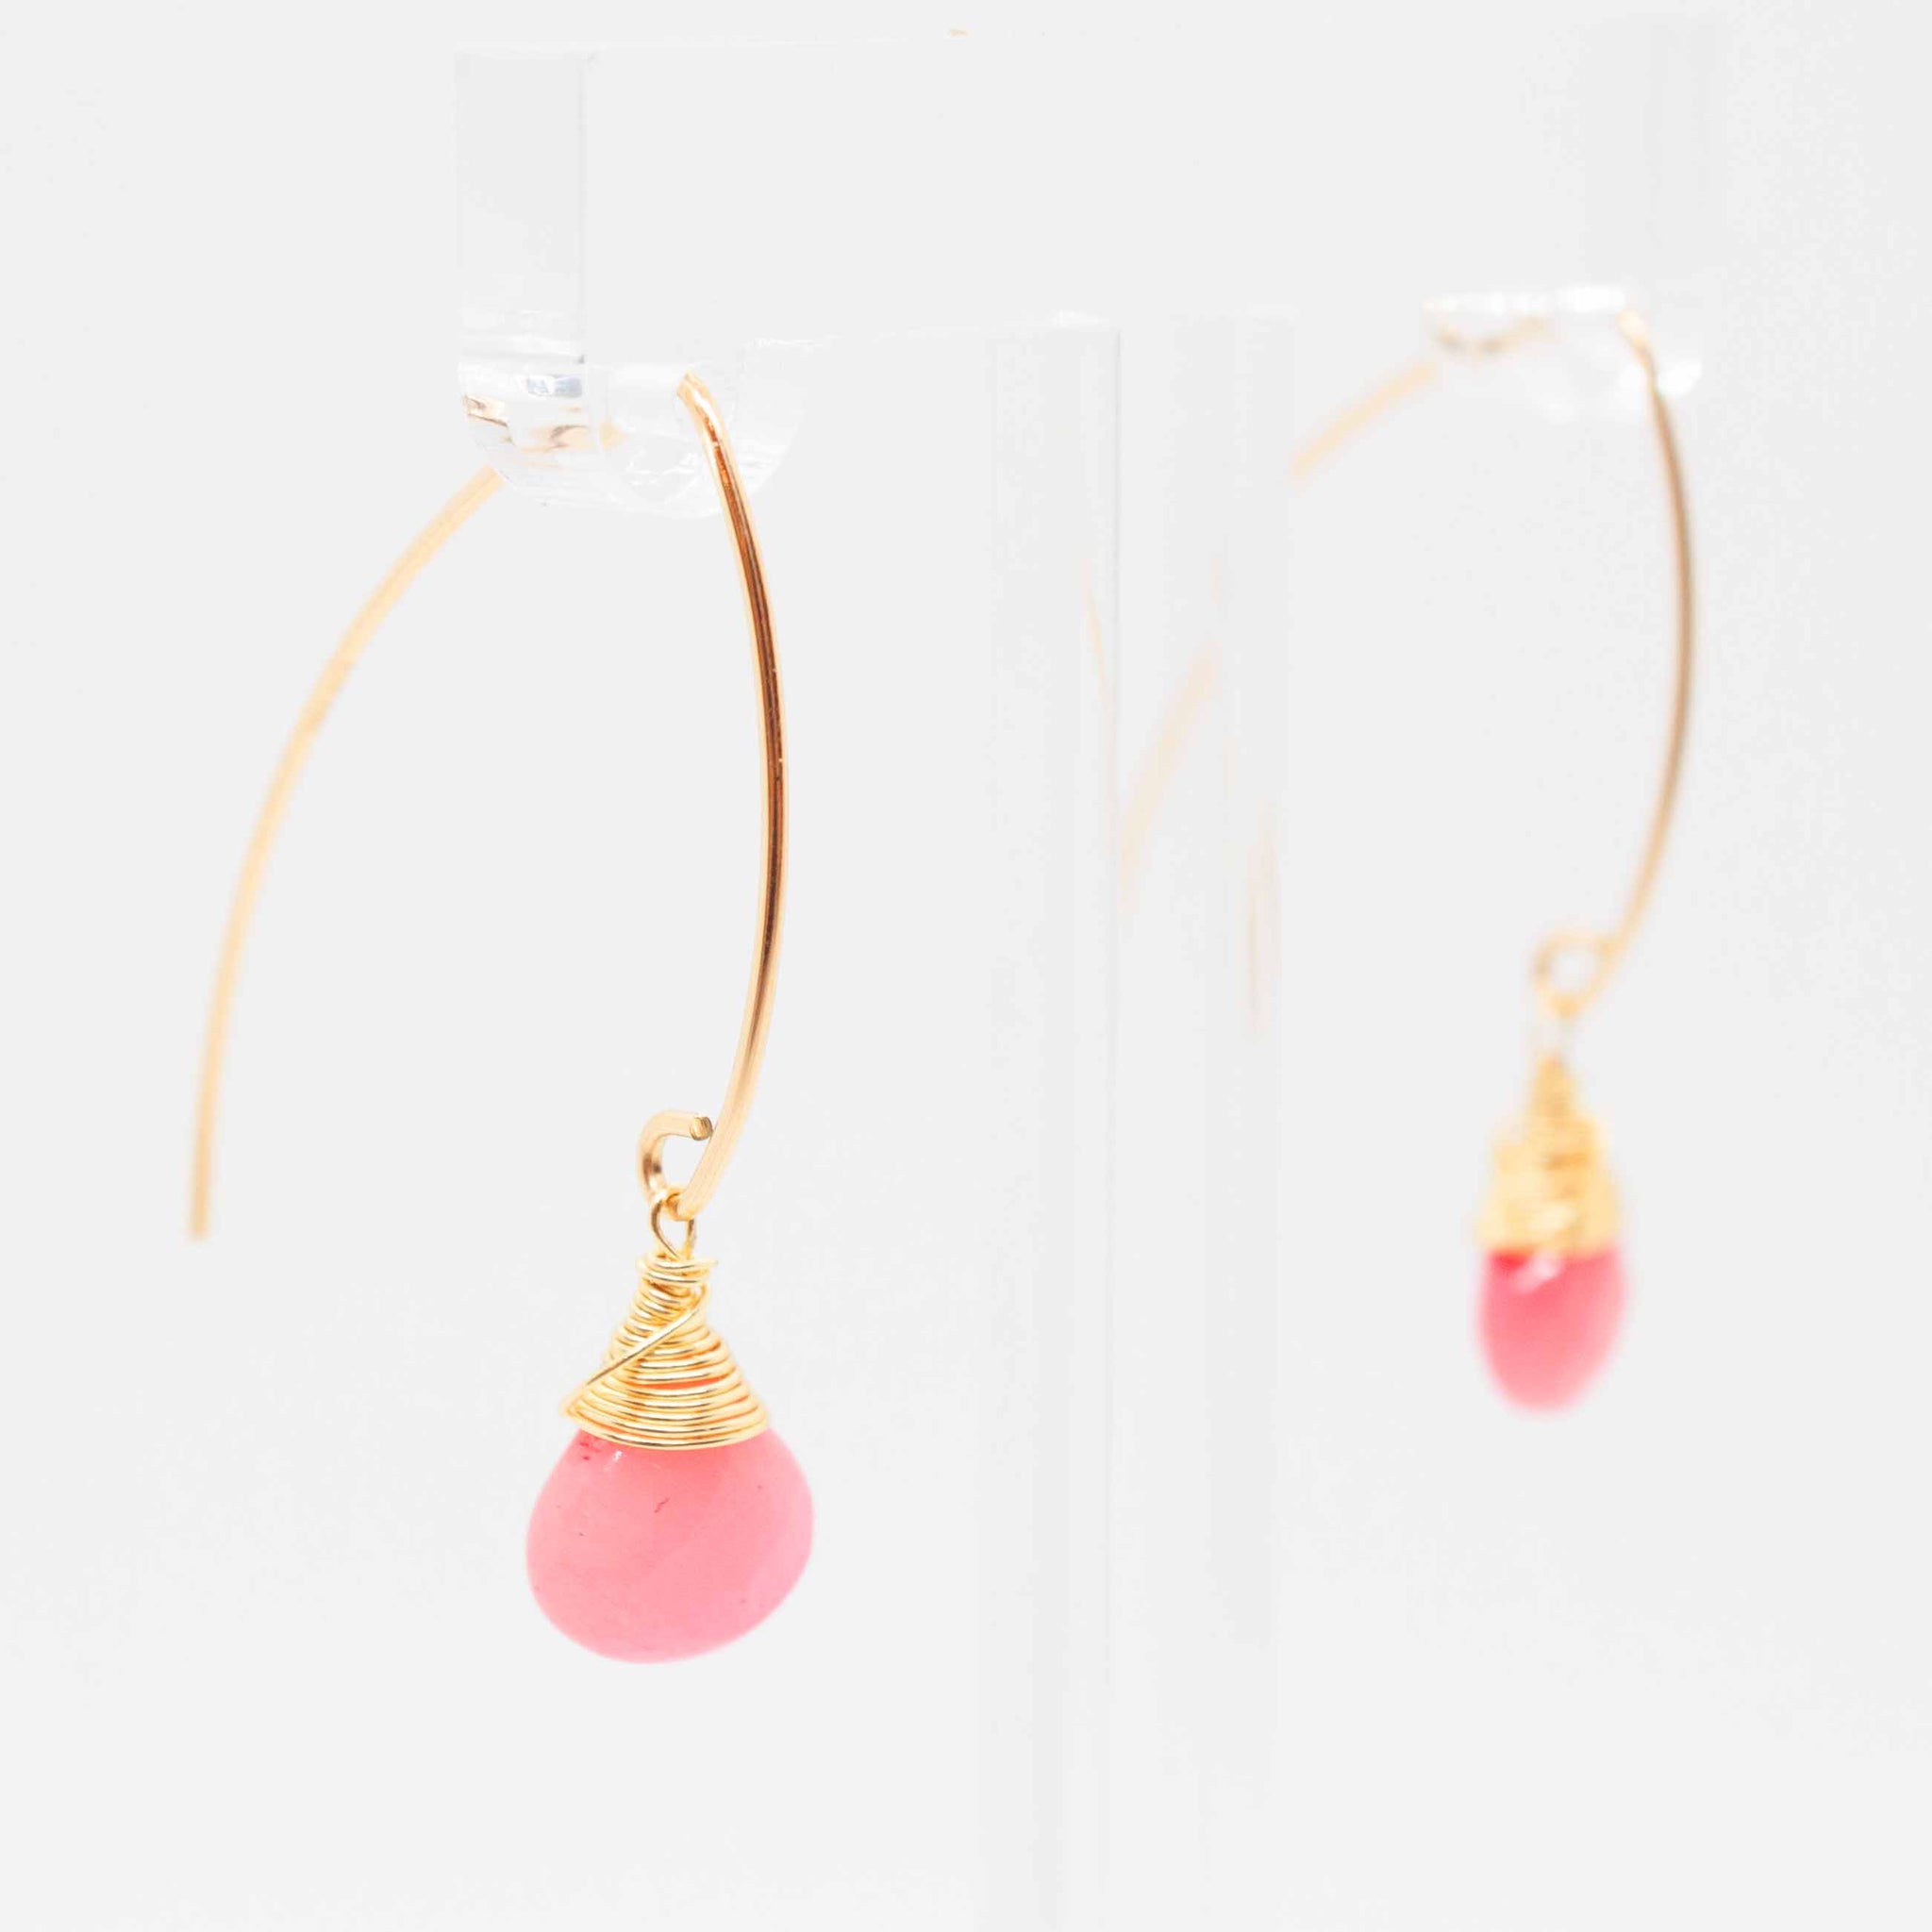 Decorate your pretty lobes this summer with these delicate jade drops wrapped in gold. 1 inch earrings made with faceted, pear-shaped pink jade briolettes, wrapped in 14 karat gold wire on gold-filled earring hooks. Hypo-allergenic and sensitive ear friendly. Handmade in Toronto by kp jewelry co.